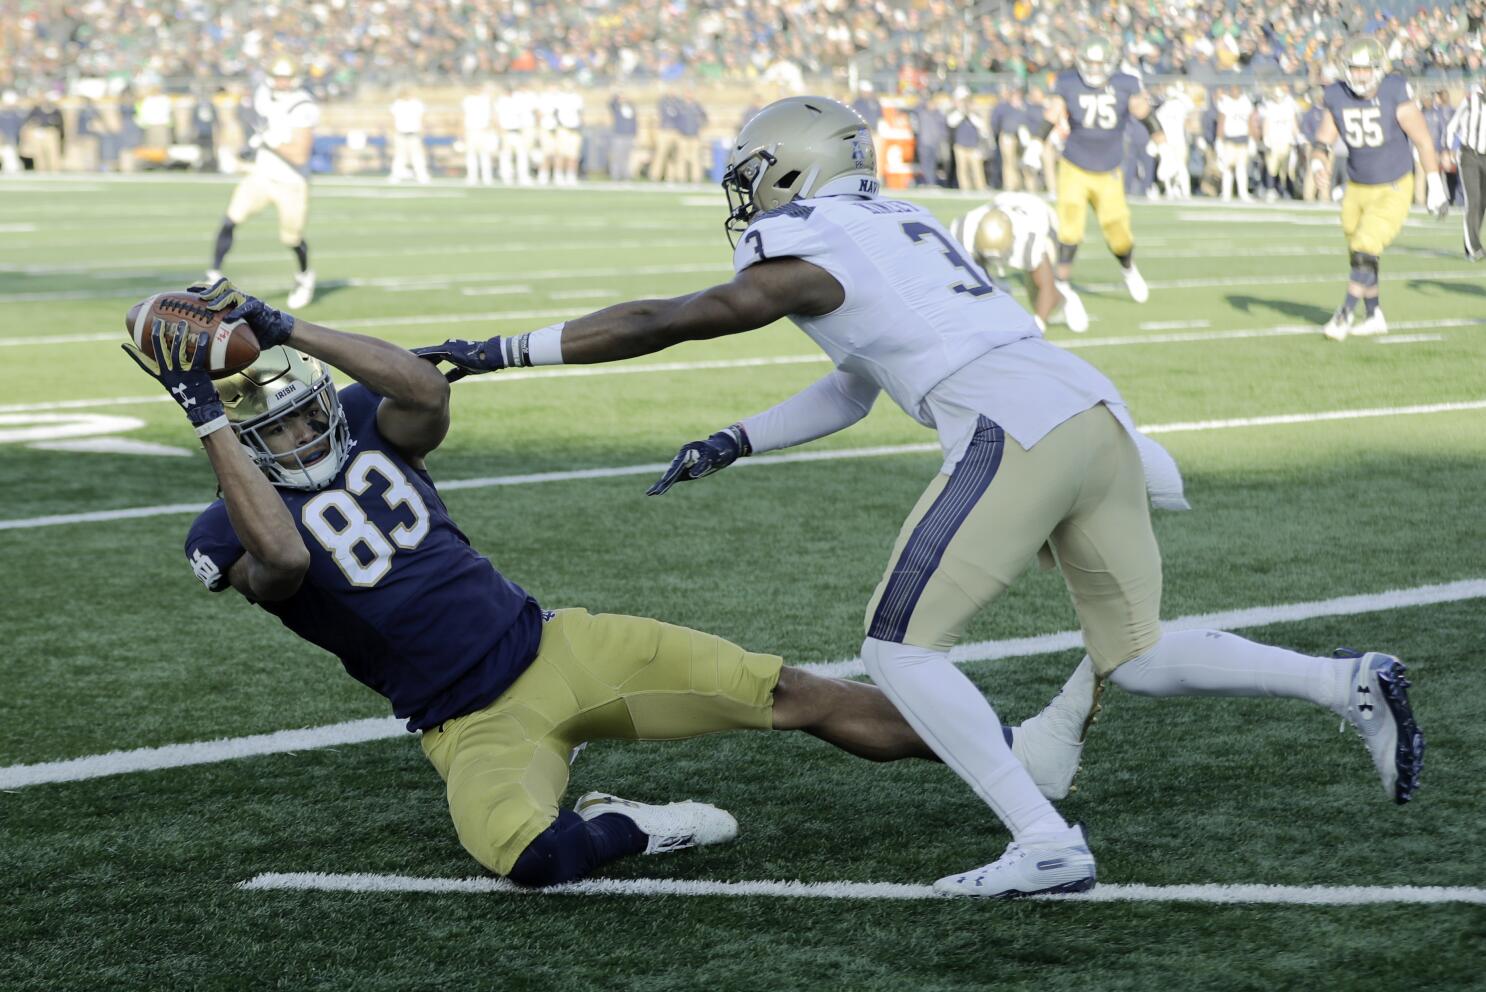 No. 16 BYU, Notre Dame looking for crucial win in Las Vegas